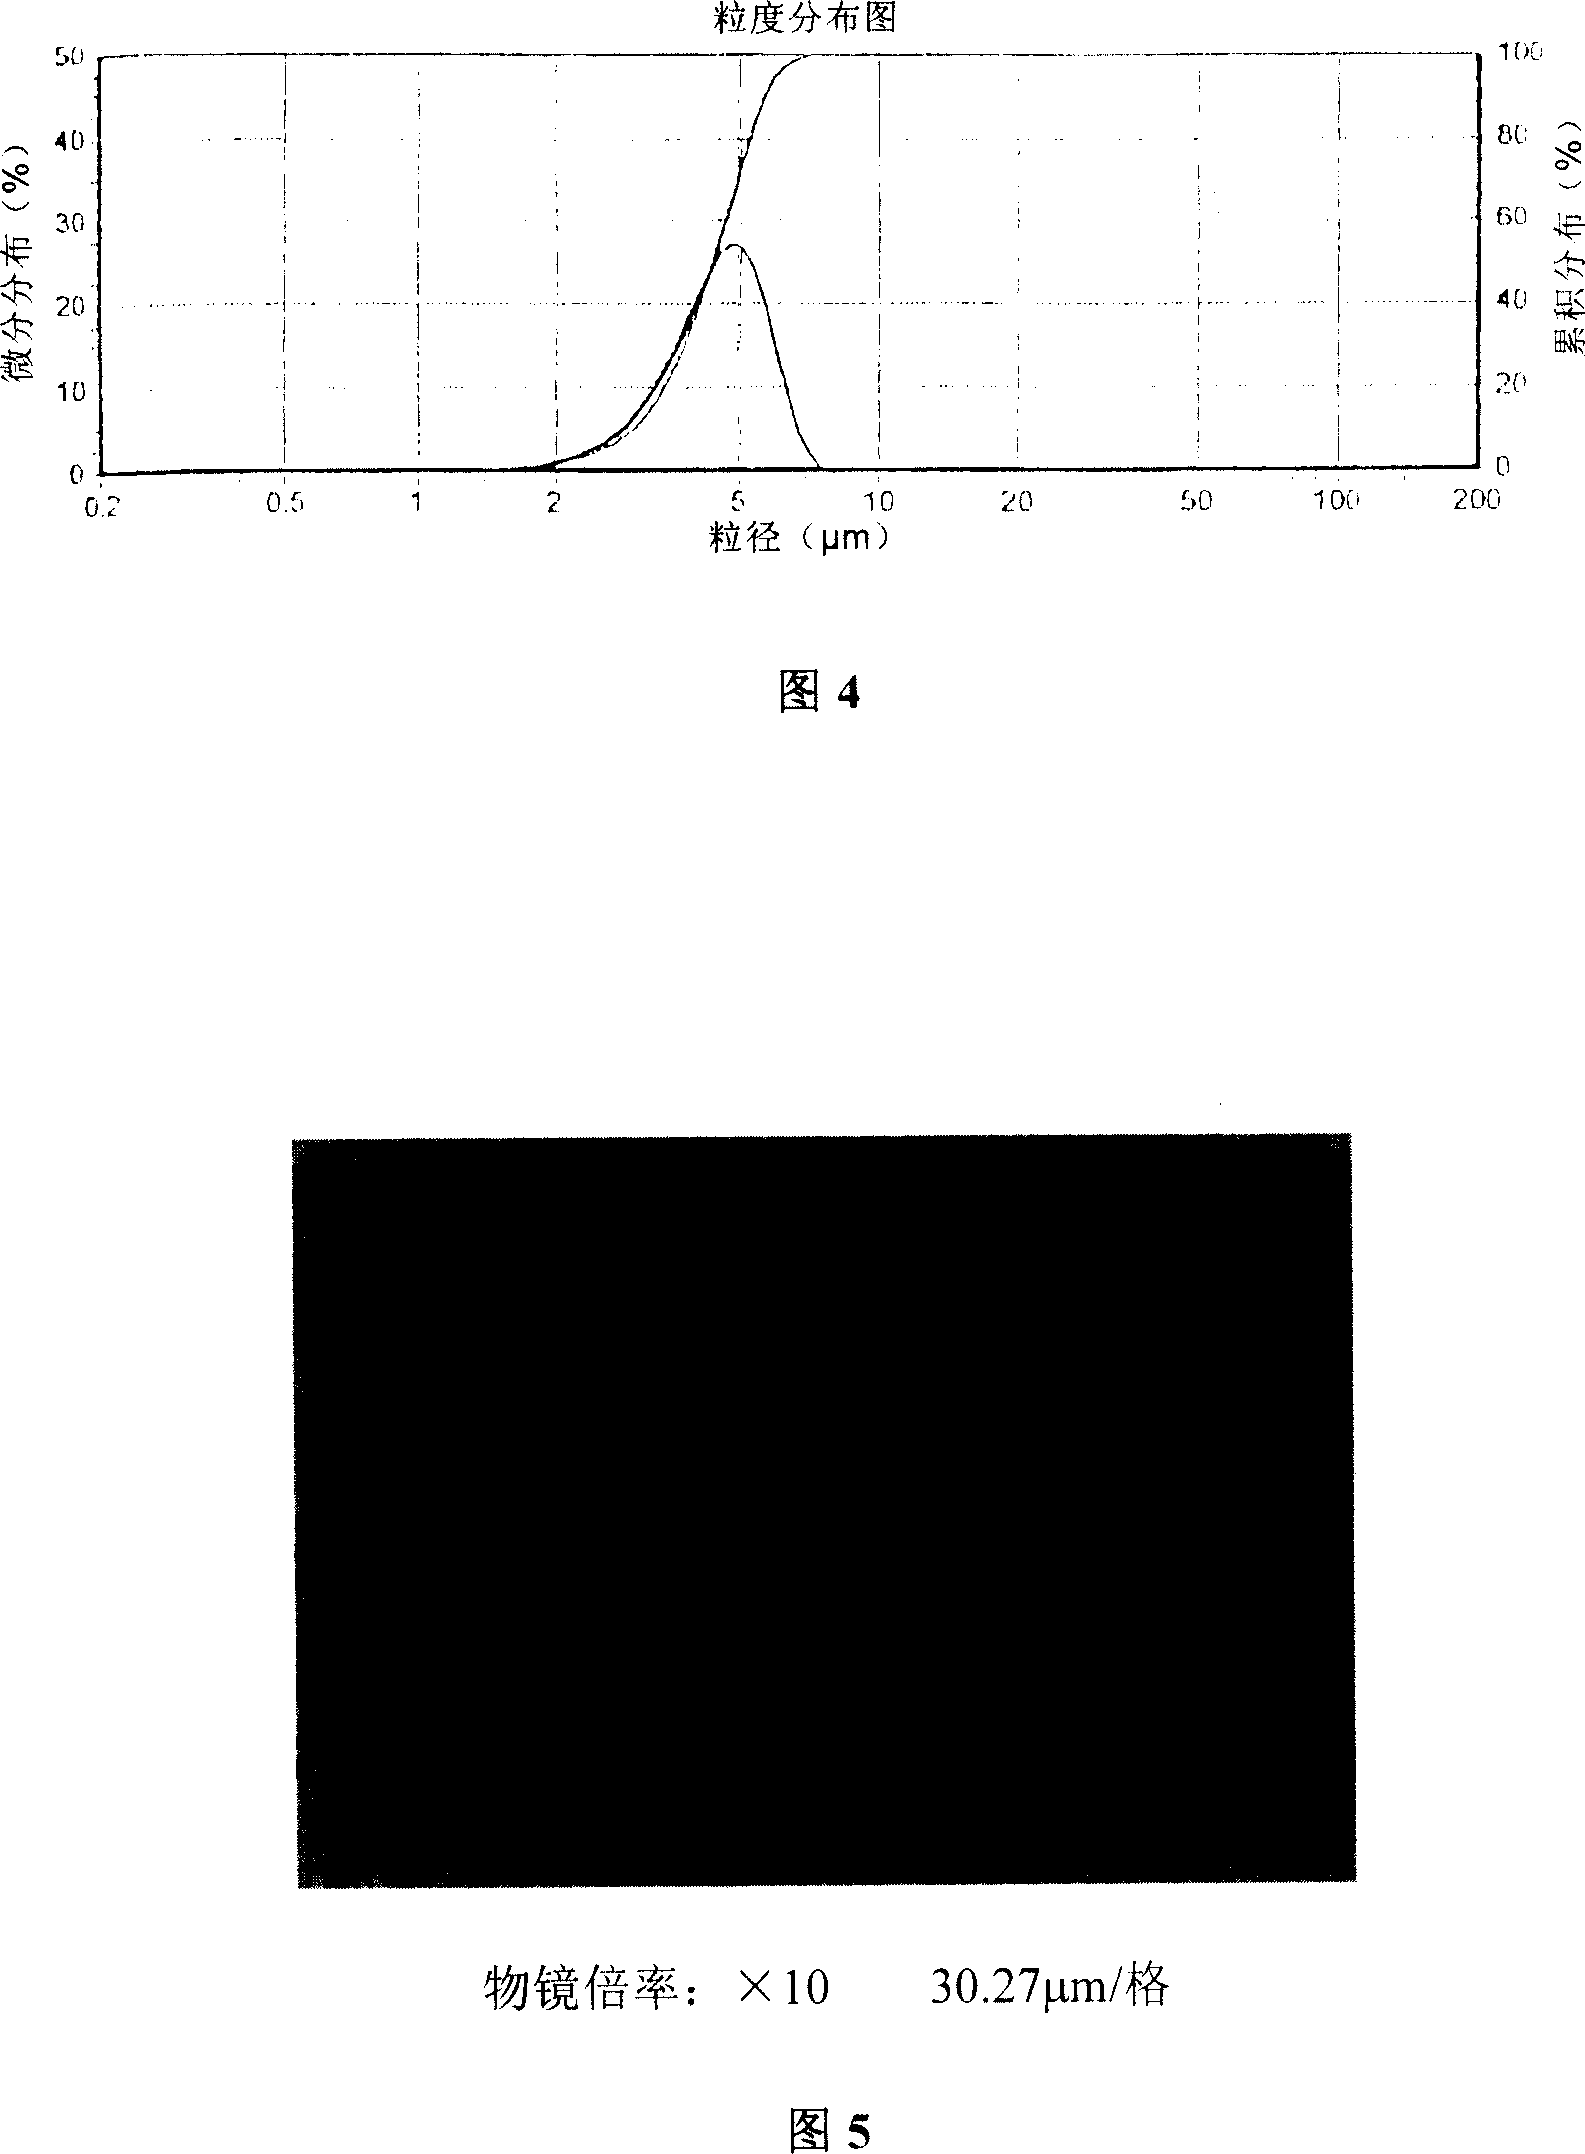 Method for producing ultramicro edible nutrient yeast powder and its product